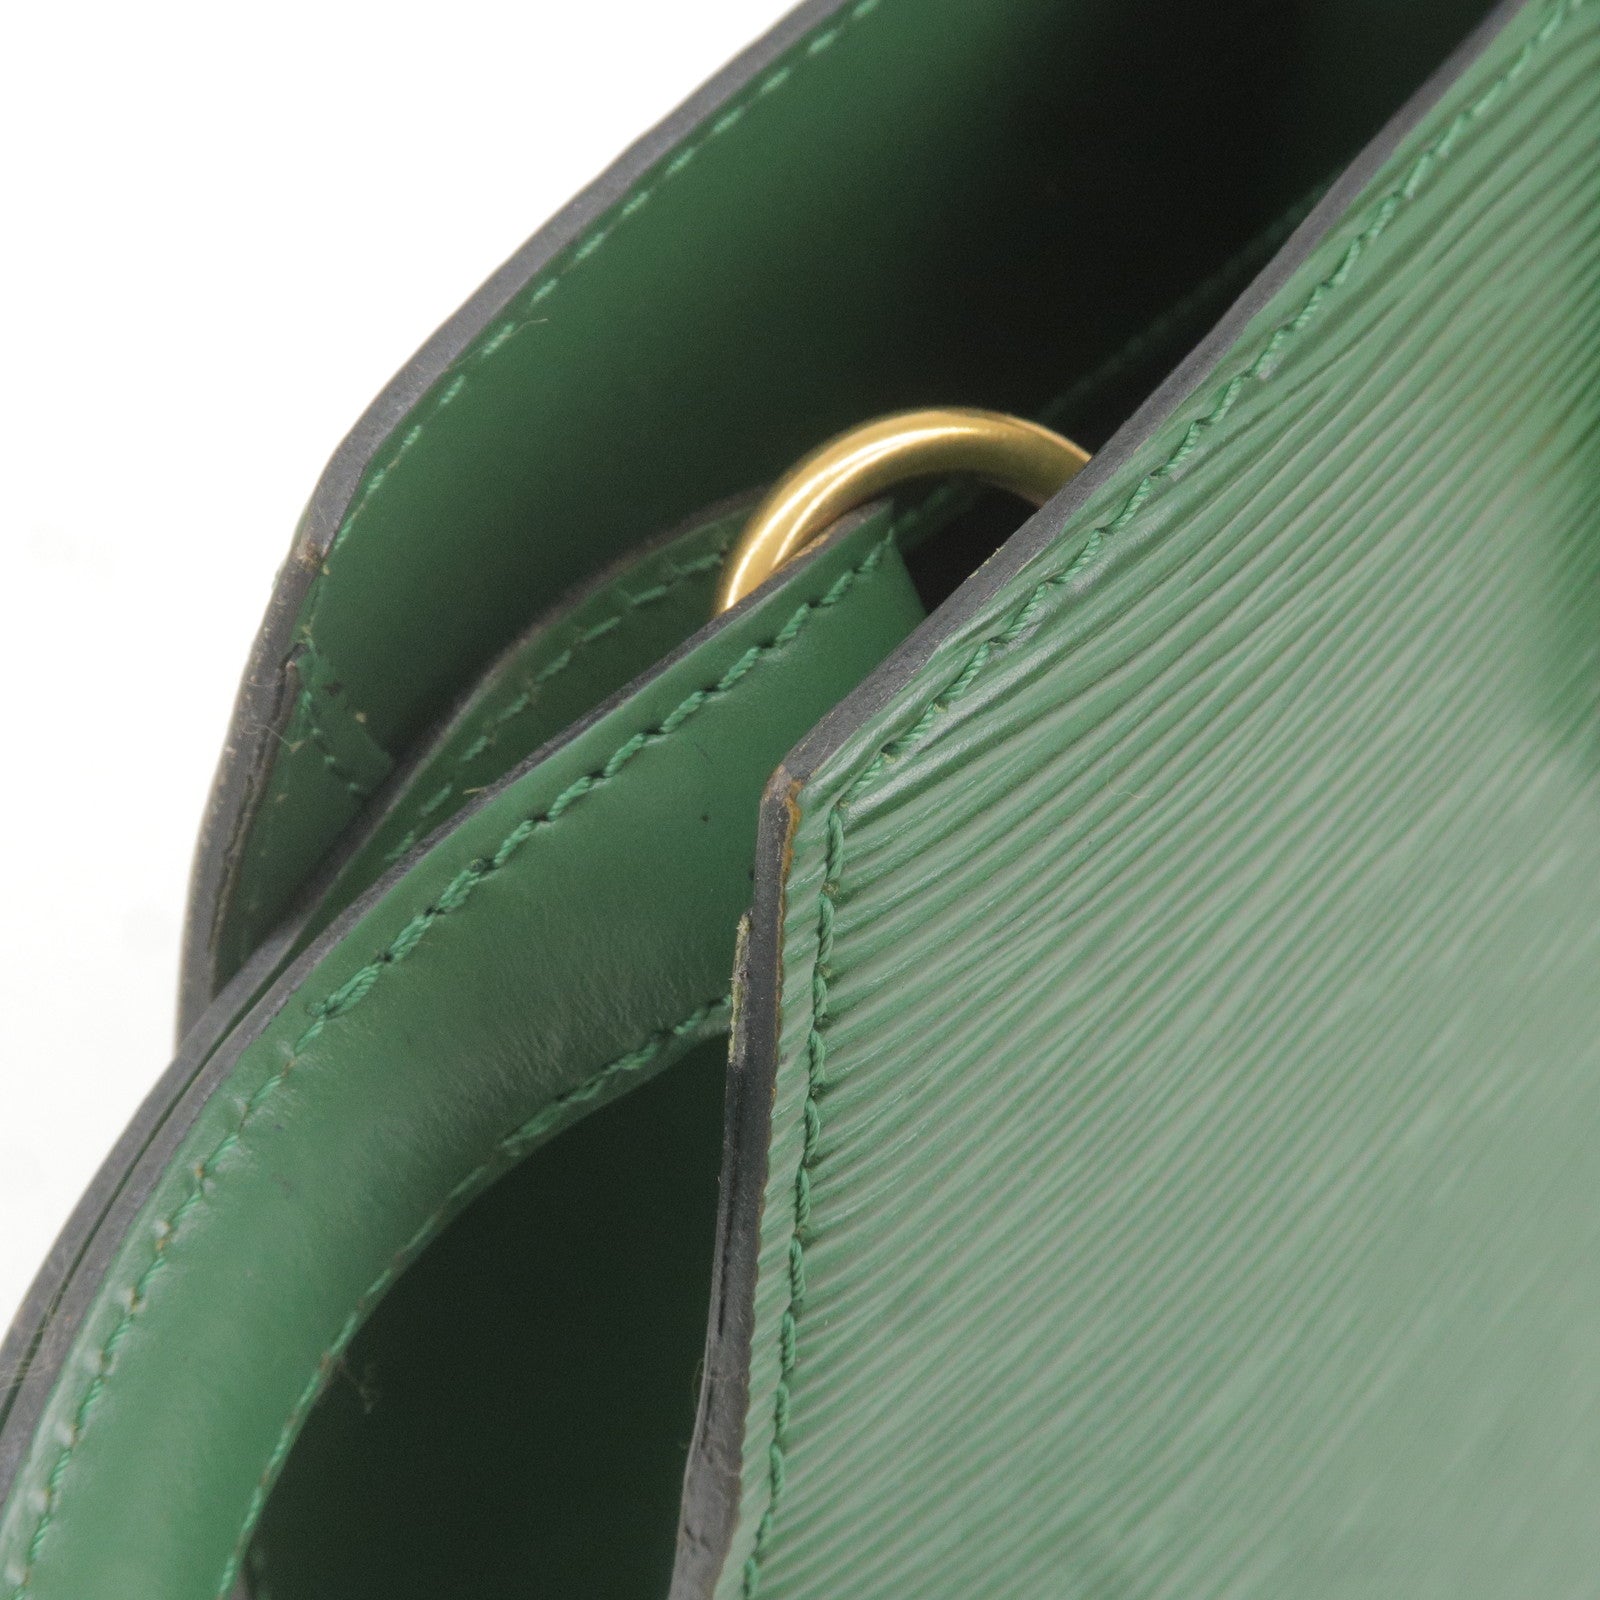 Louis Vuitton Vintage Green Epi Leather Cluny Bag // Available in store!